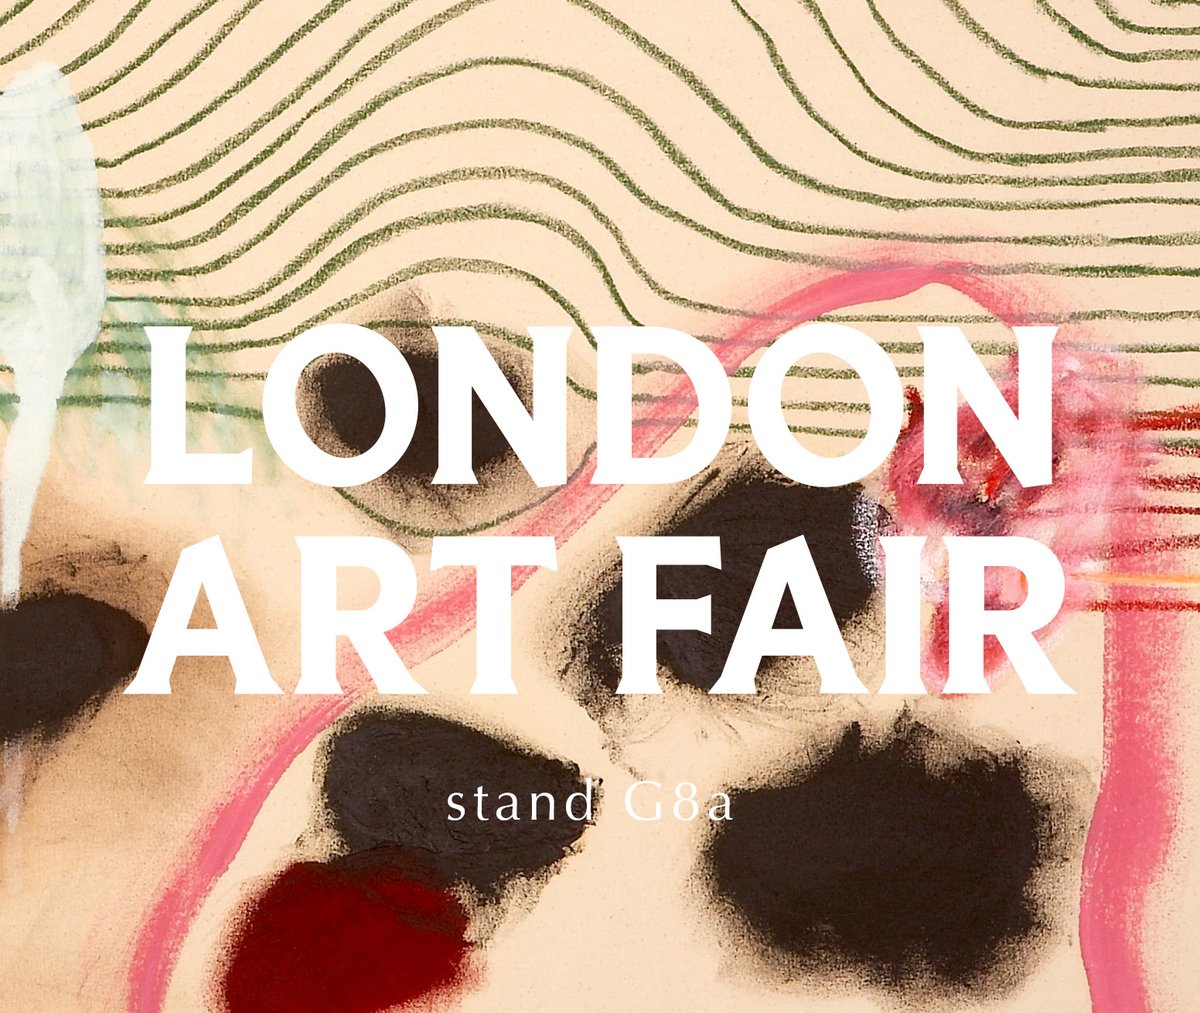 We're excited to be heading off to our first @LondonArtFair later this month! We'll be taking six incredible female artists with us, click the link to learn more about the fair, the artists we're showcasing and to buy tickets

londonartfair.co.uk/galleries/darl…